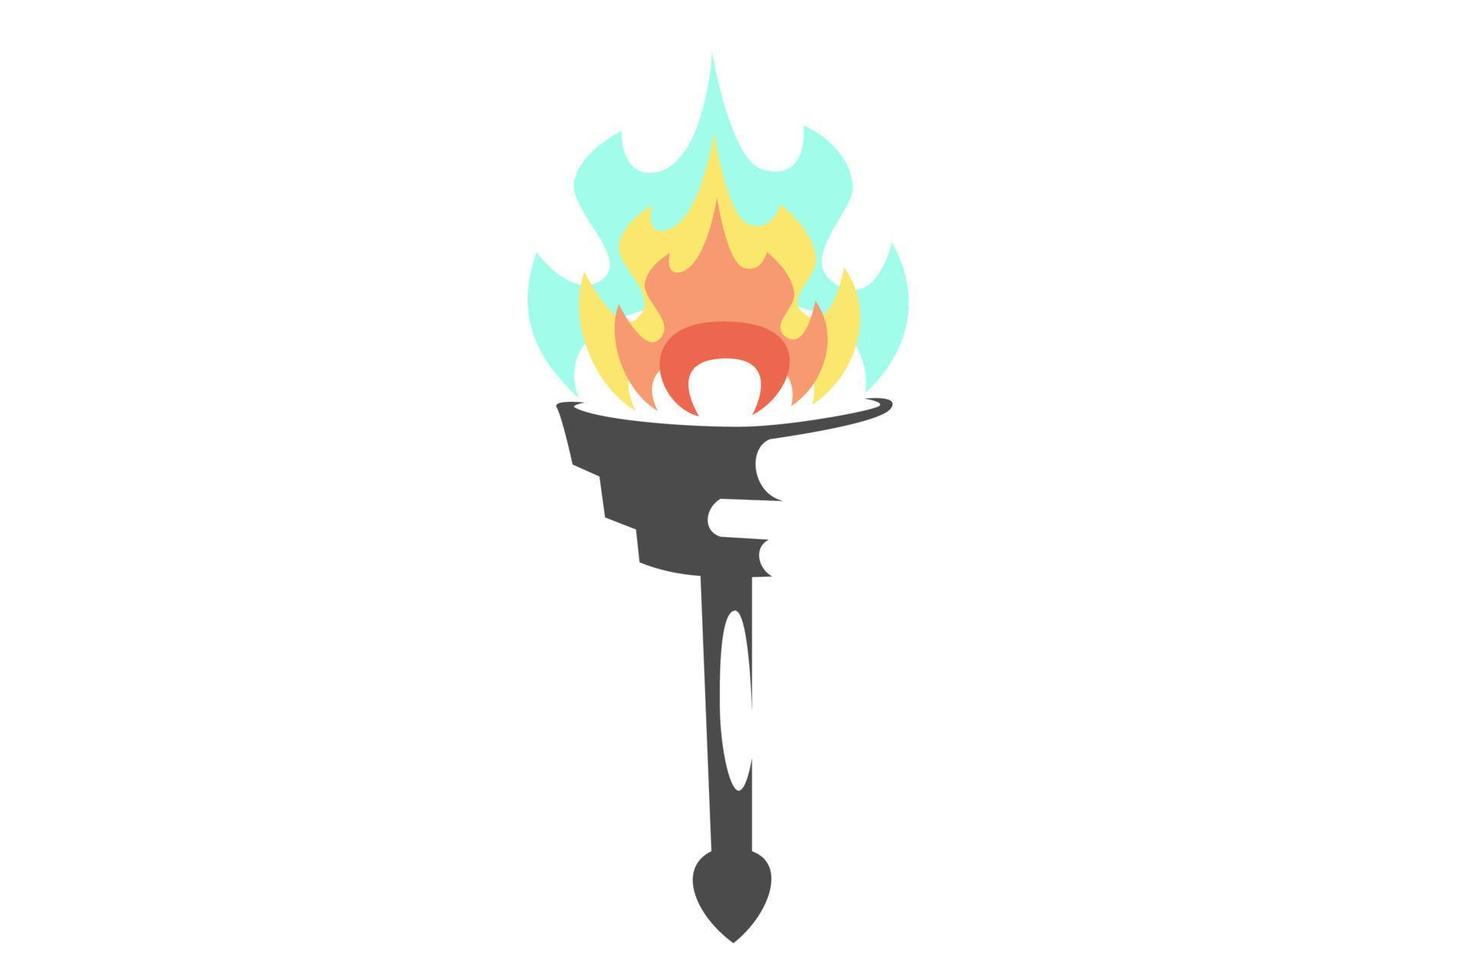 Colorful flame with icon on white background isolated vector